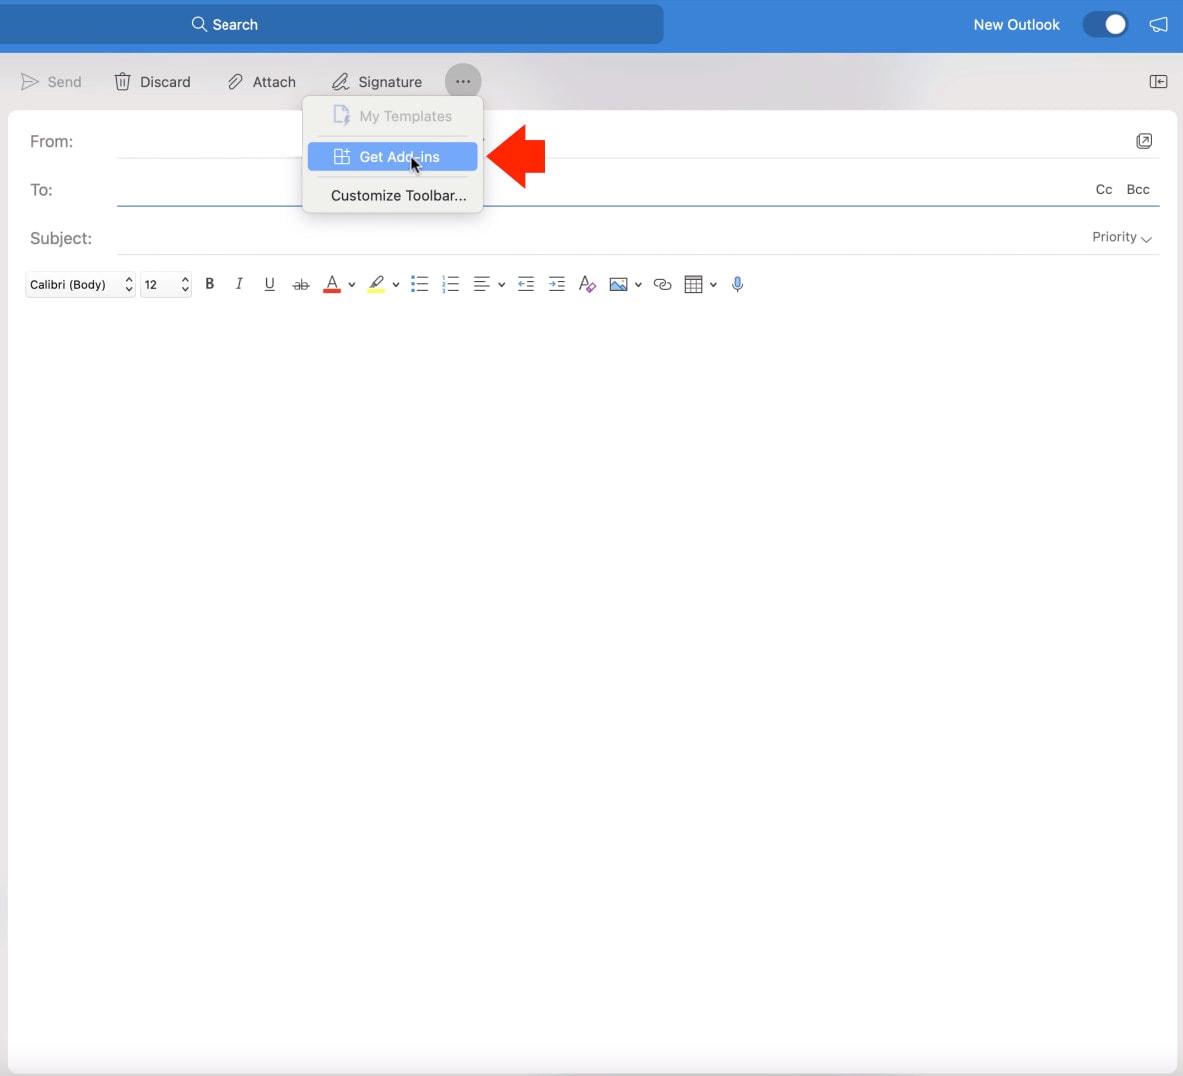 Embedding an email in outlook